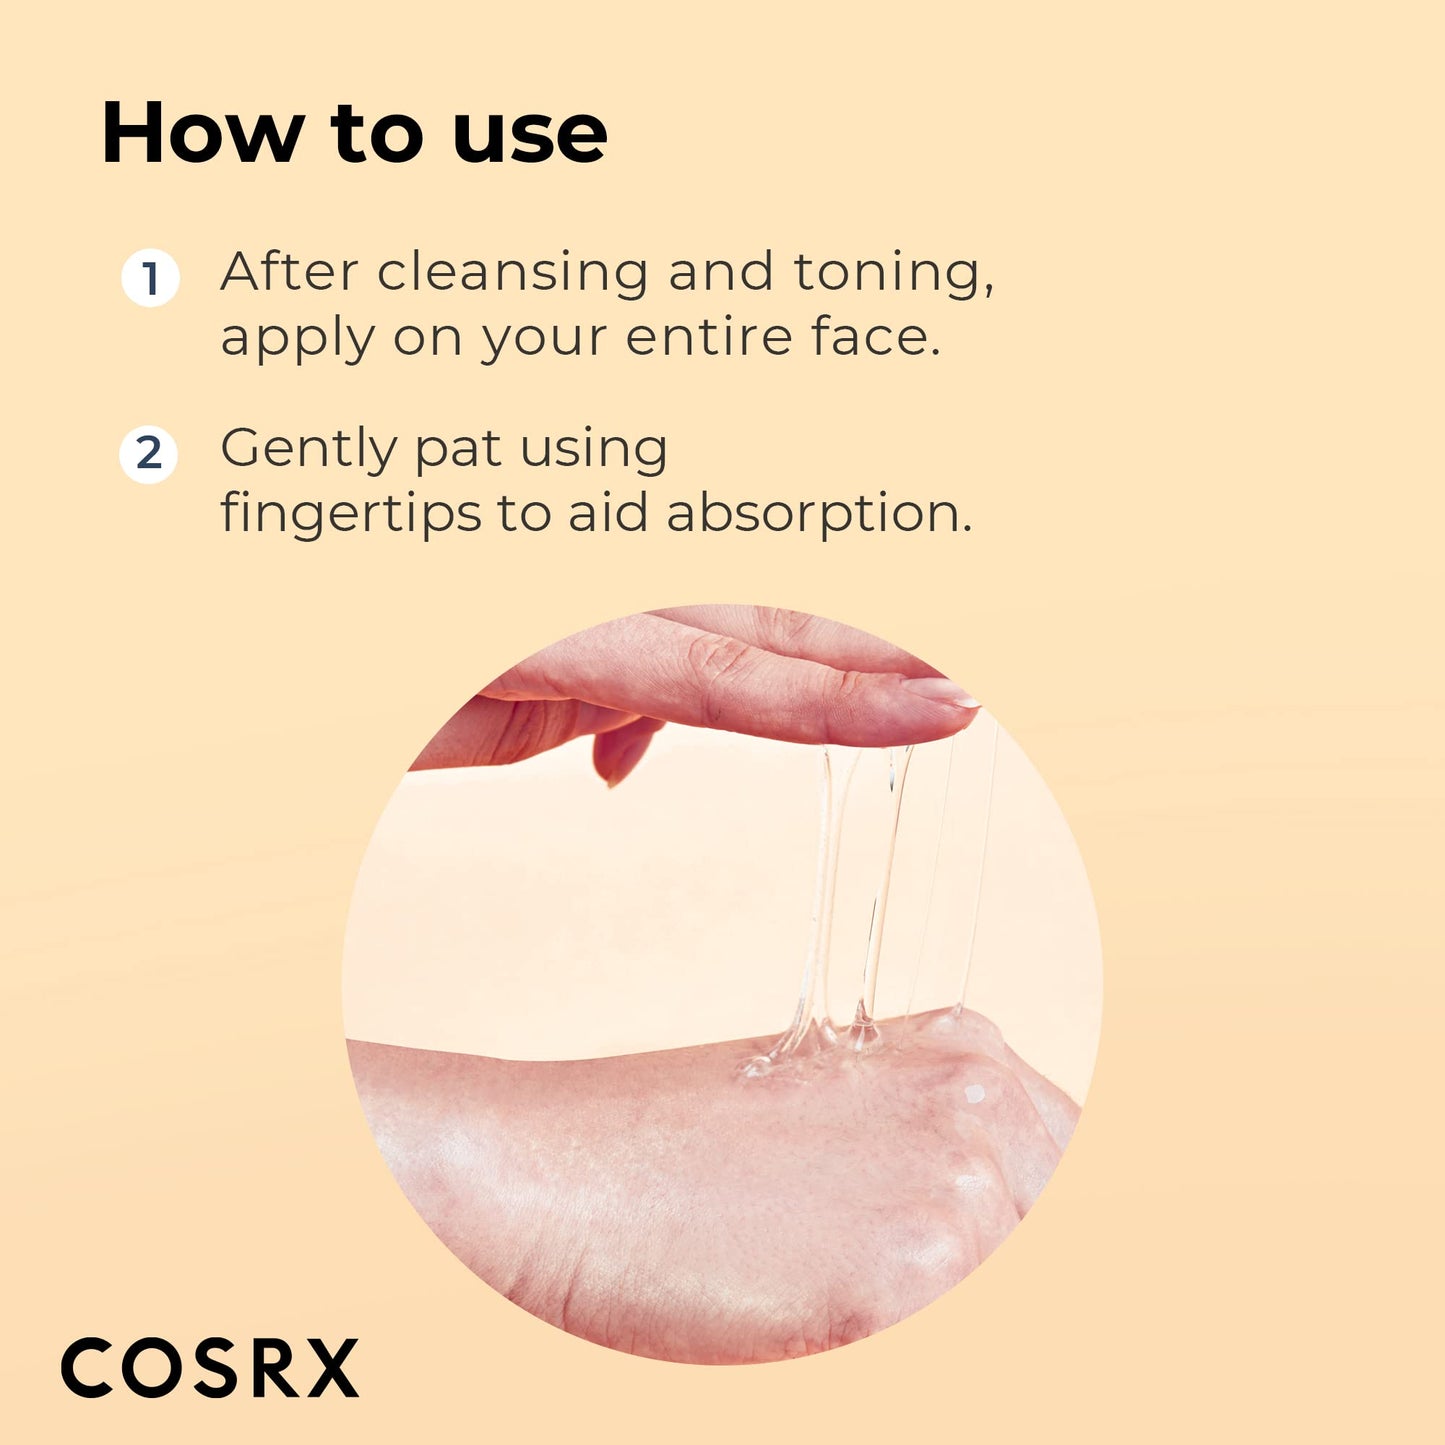 How to use COSRX Snail Mucin Essence (96%) - Hydrating Face Serum for Glowing Skin (100ml) - Korean Skincare, Dullness & Fine Lines